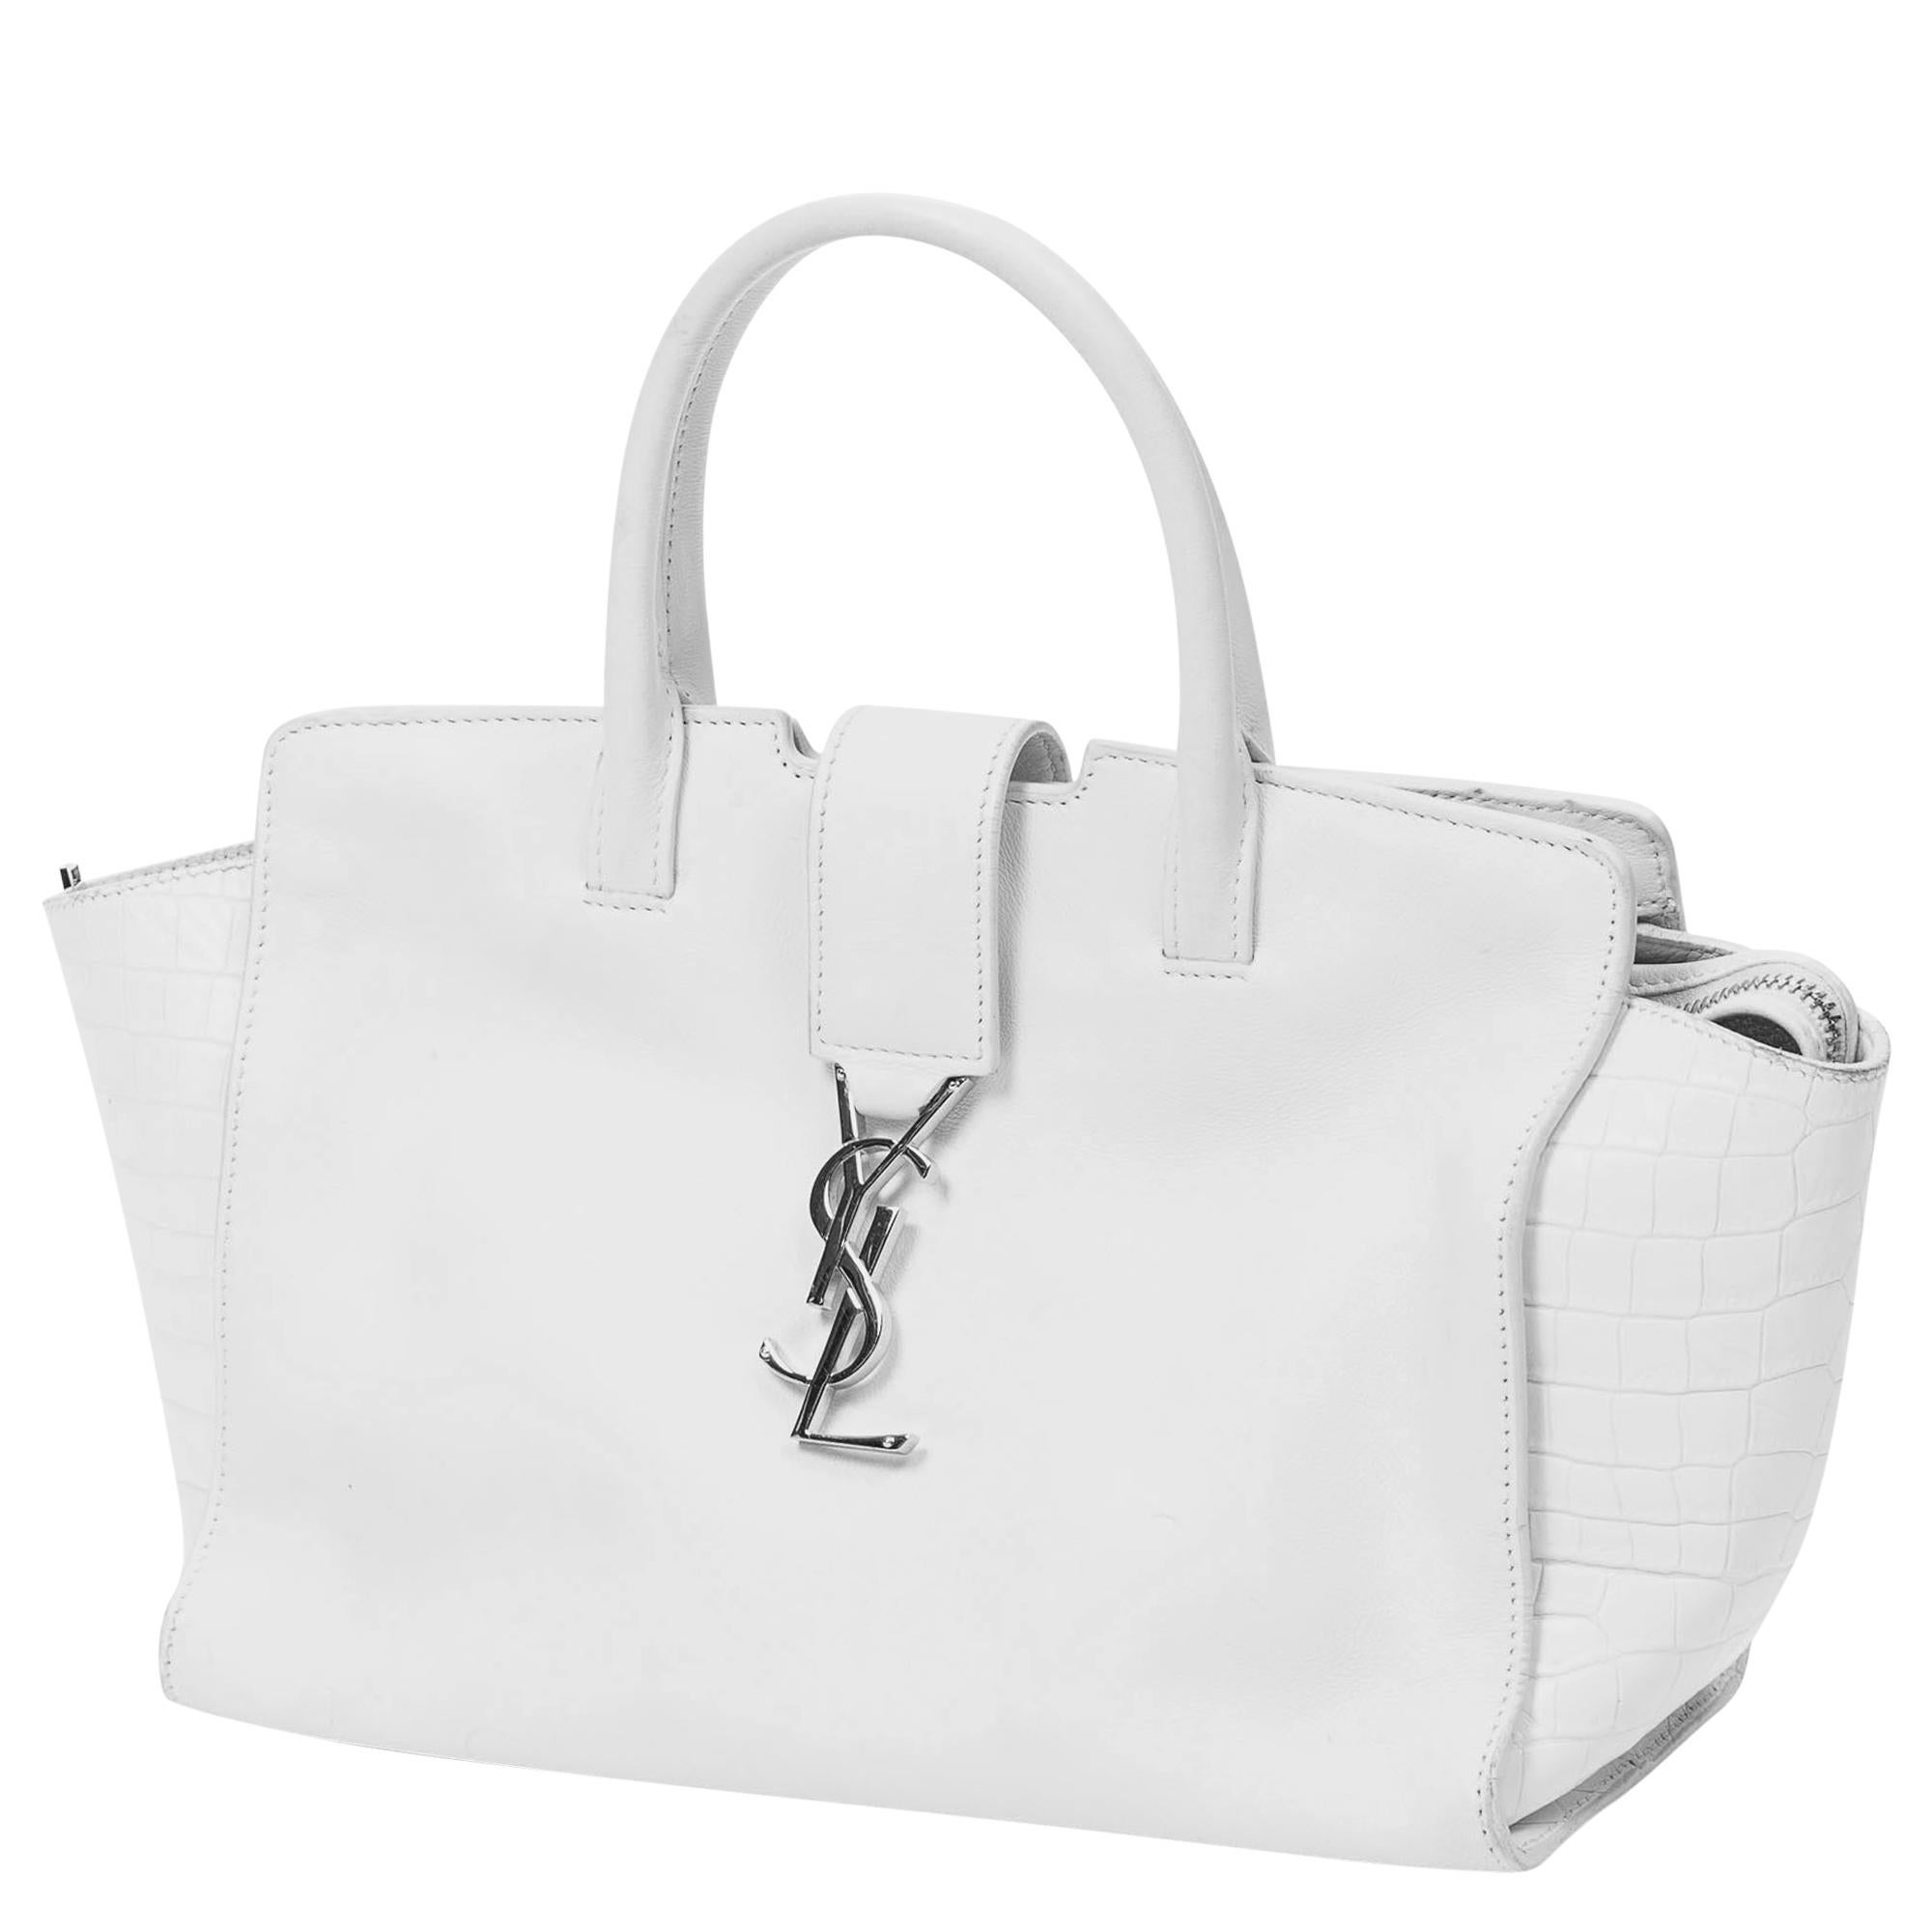 Elevate your ensemble with the Yves Saint Laurent White Logo Tote. Crafted from premium calfskin leather in pristine white, it exudes timeless elegance. Adorned with silver-tone hardware and featuring a practical zipper closure, its leather-lined